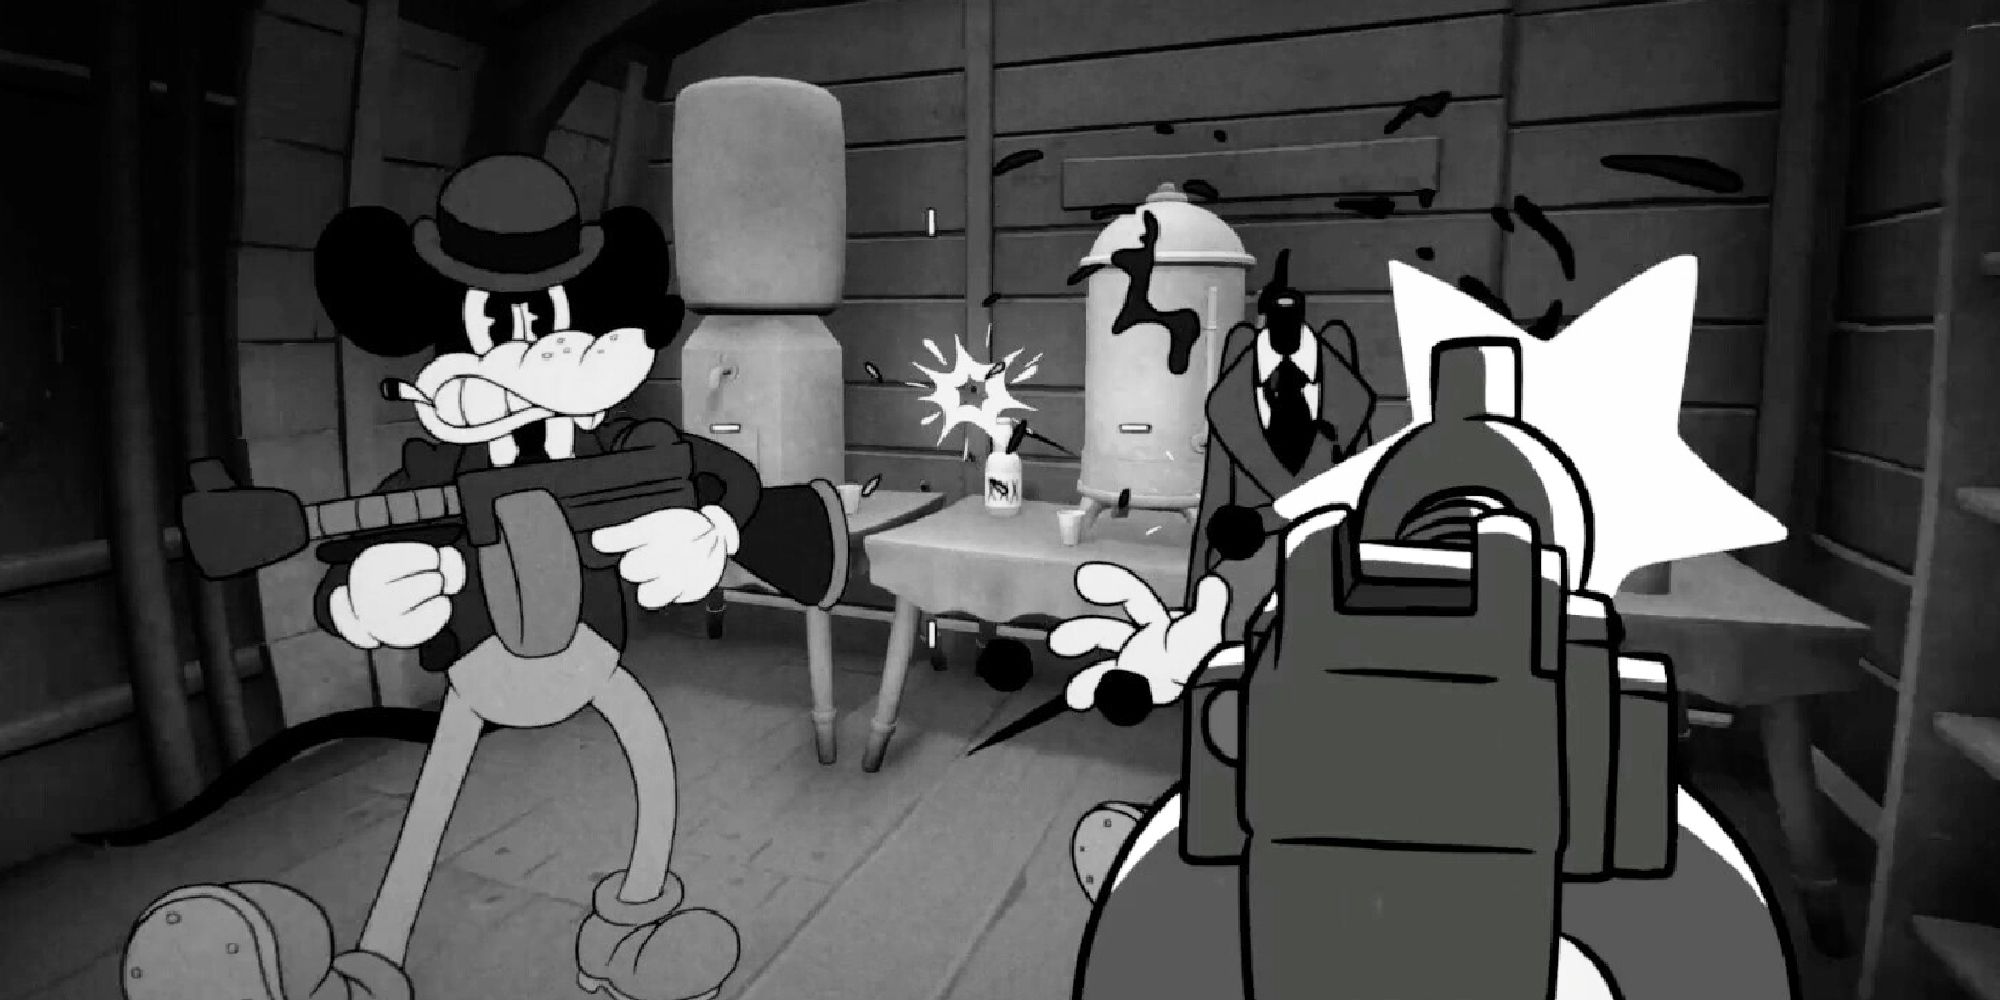 Horror Steamboat Willie, There's A Mickey Mouselike Boomer Shooter